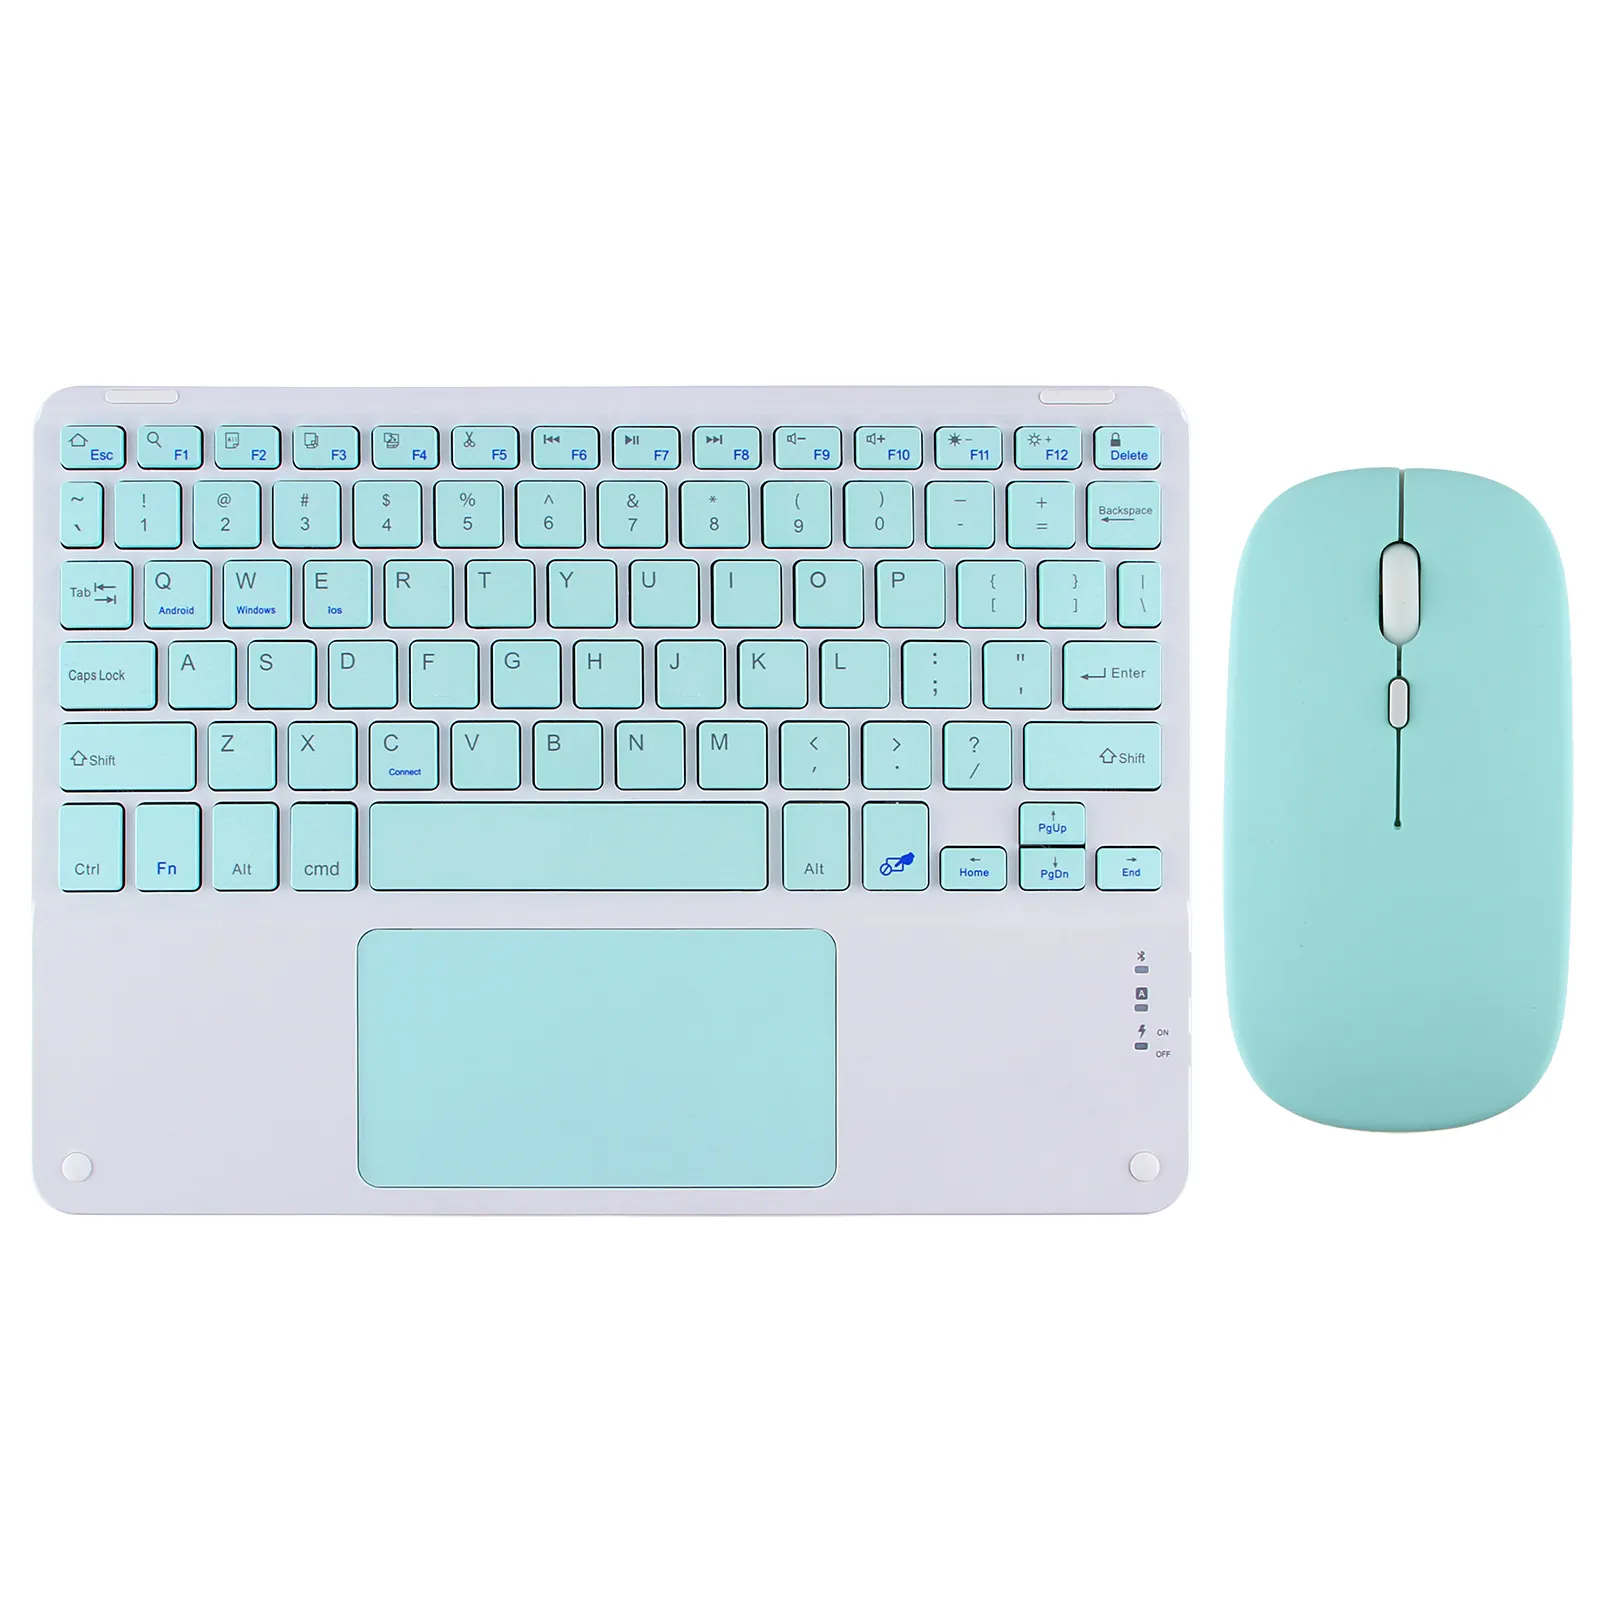 2021 BT Trackpad Combo Keyboard and Mouse for Apple Samsung Xiaomi Android Nexus, Microsoft Surface Wireless Keyboard